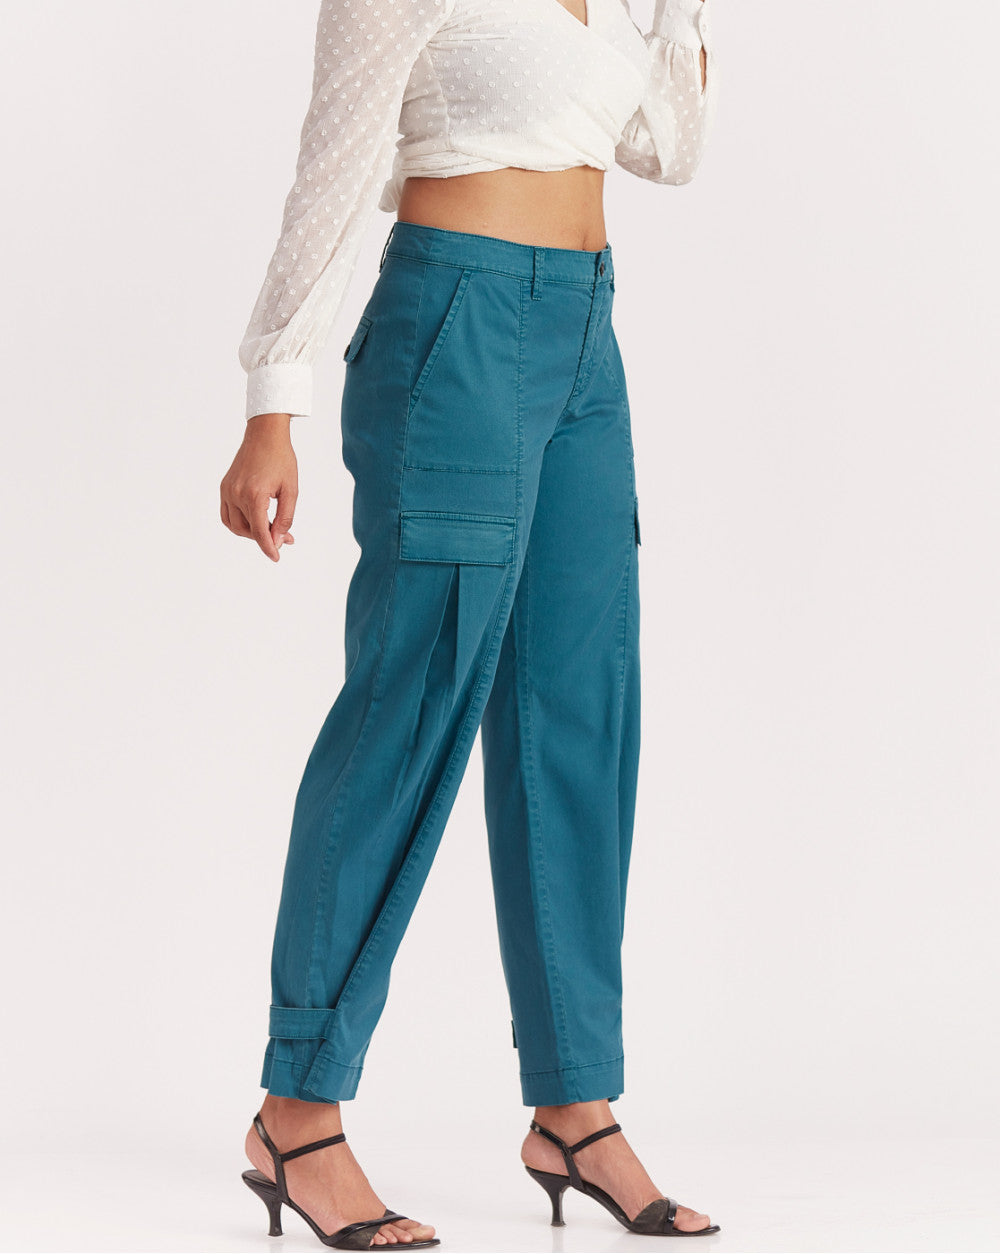 Straight Fit Garment Dyed Utility Pants - Marine